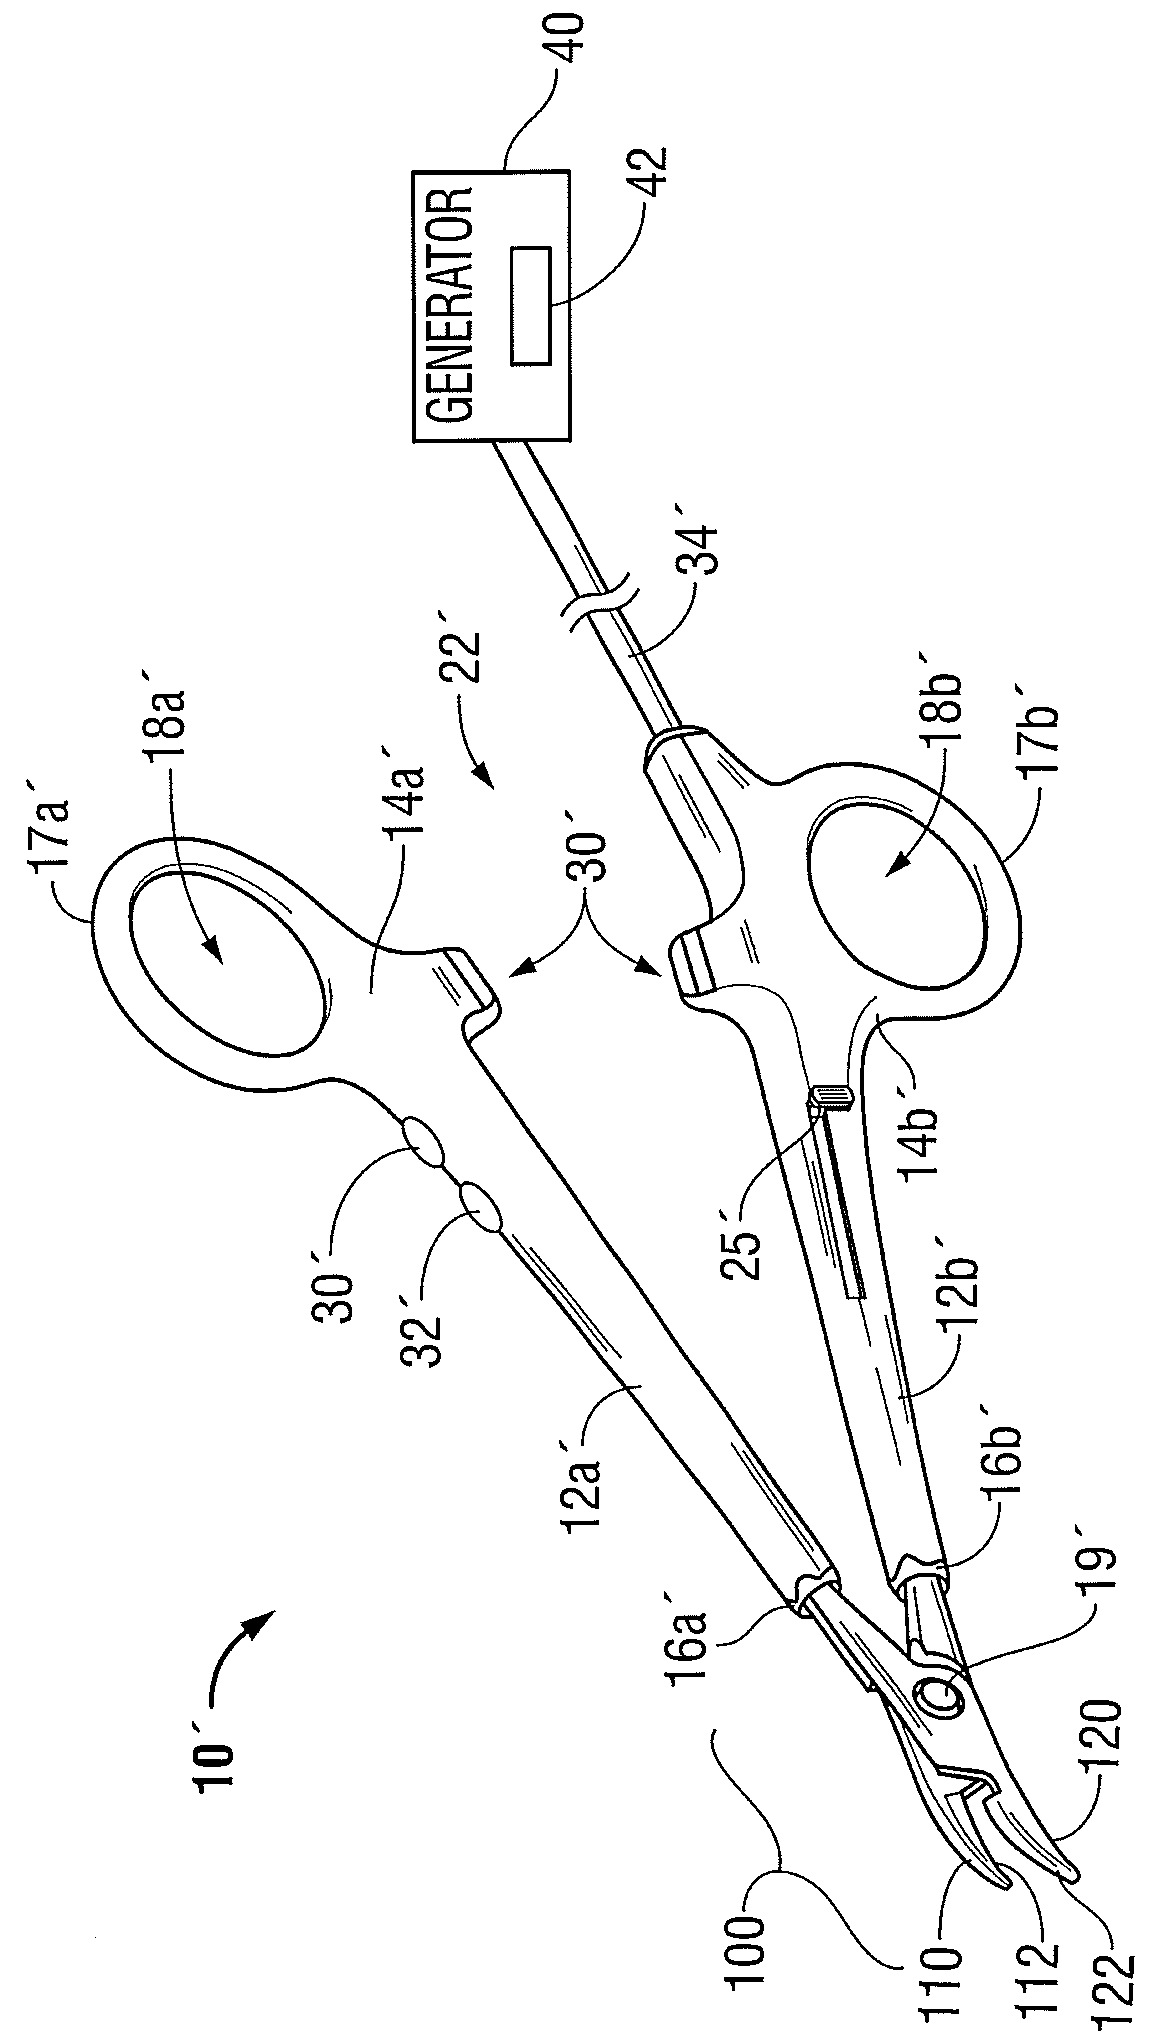 Light energy sealing, cutting and sensing surgical device